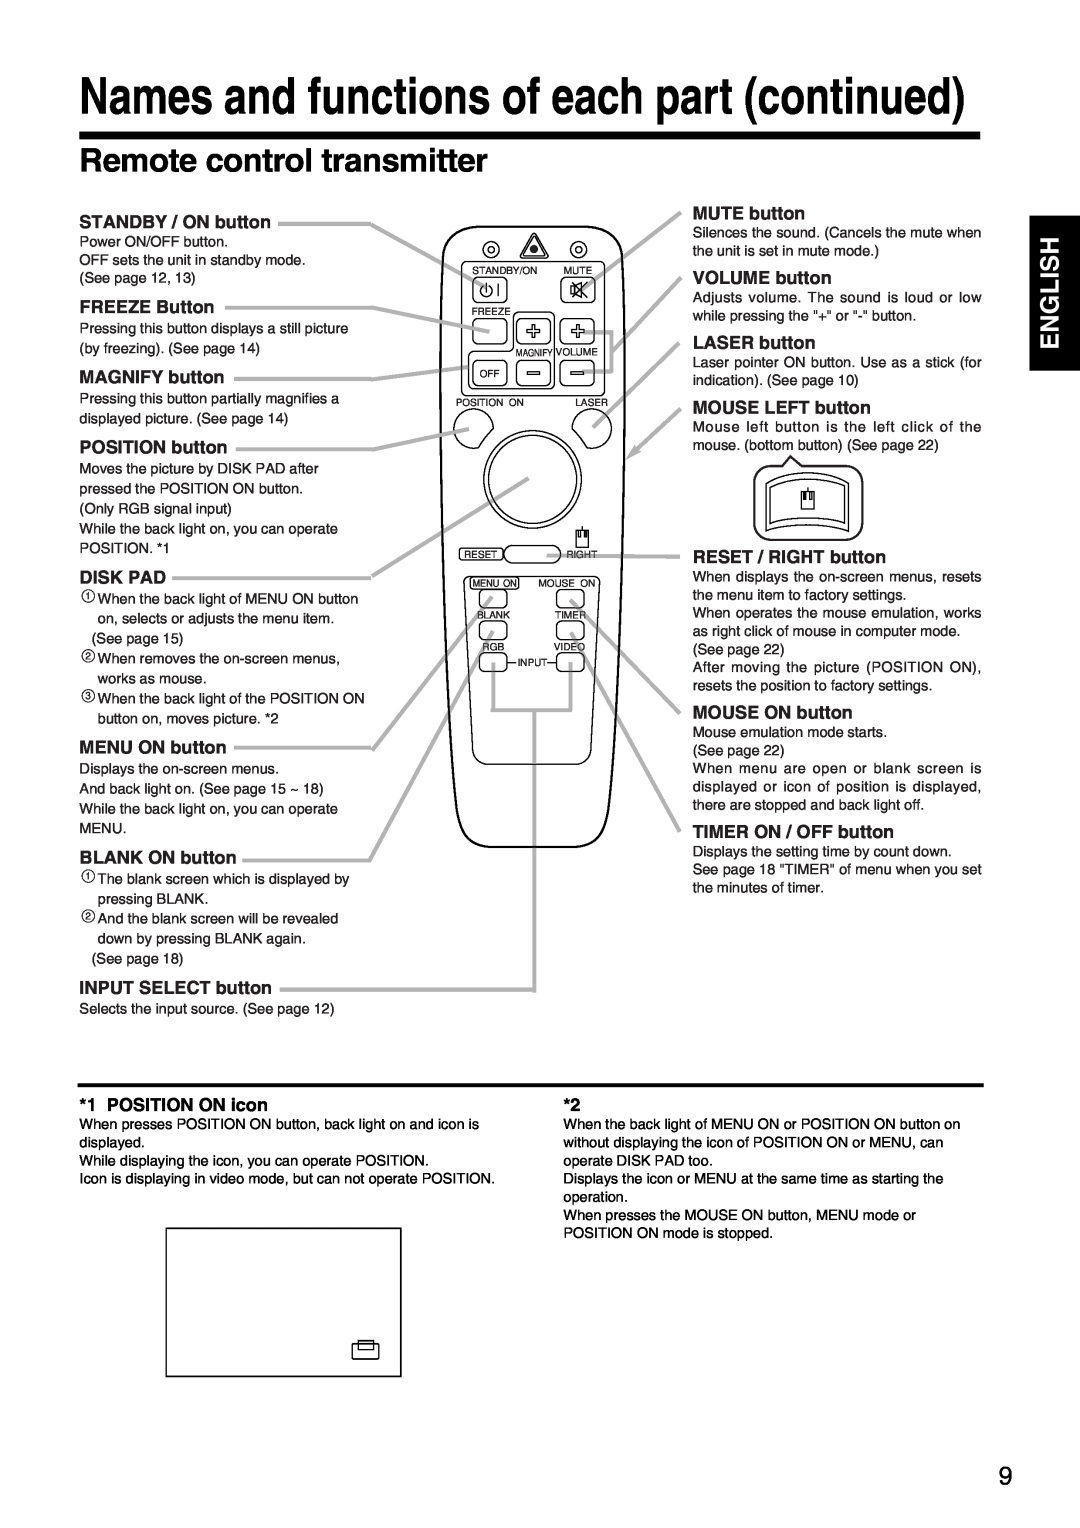 Hitachi CP-X935W specifications Names and functions of each part continued, Remote control transmitter, English 